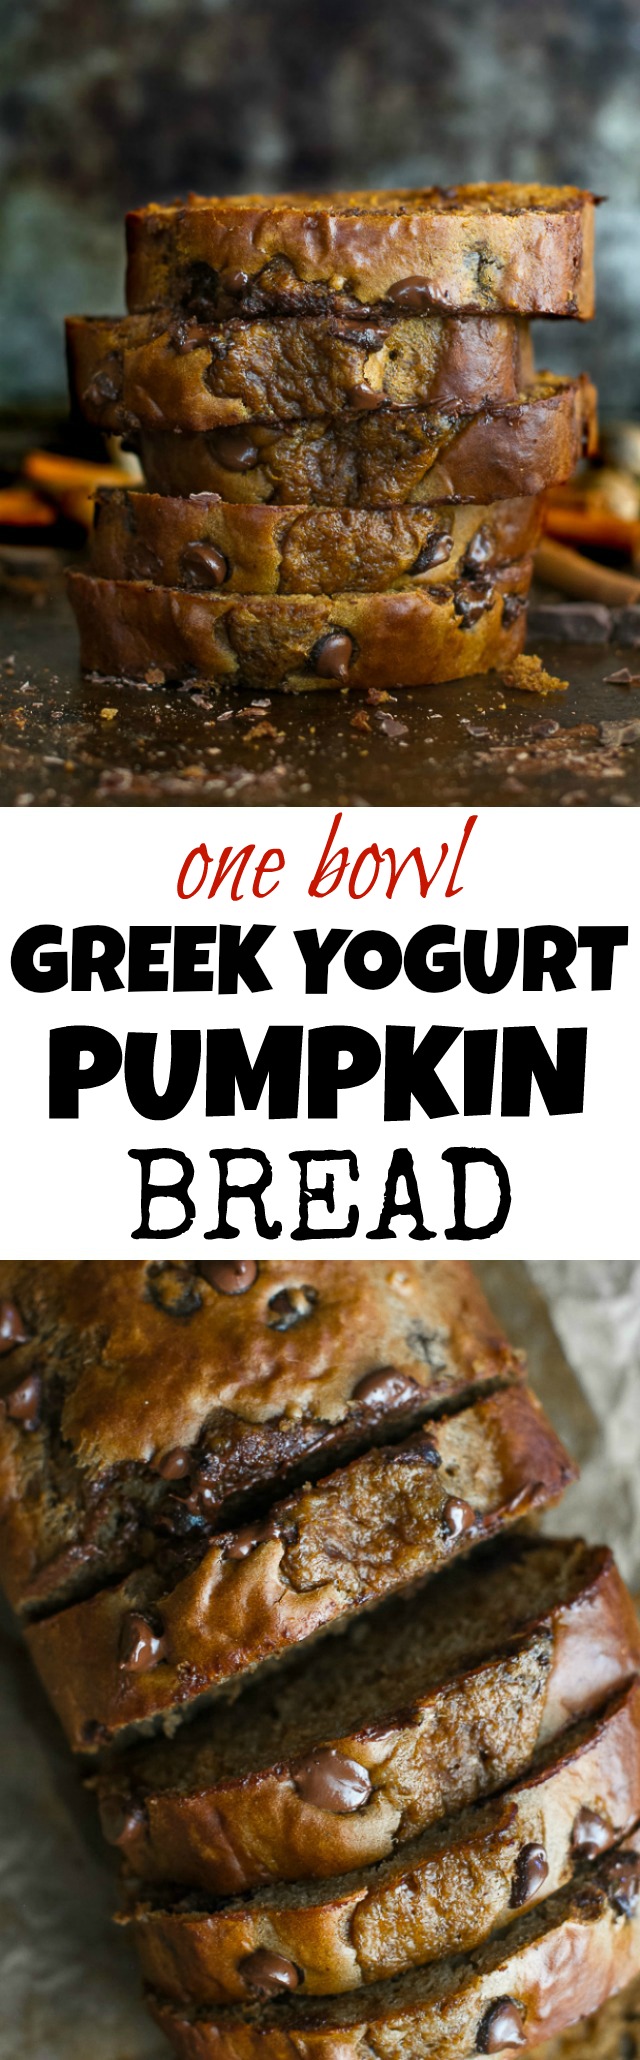 This One Bowl Greek Yogurt Pumpkin Bread recipe is made without butter, oil, or refined sugar, but so tender and flavourful that you’d never be able to tell it's healthy! | runningwithspoons.com